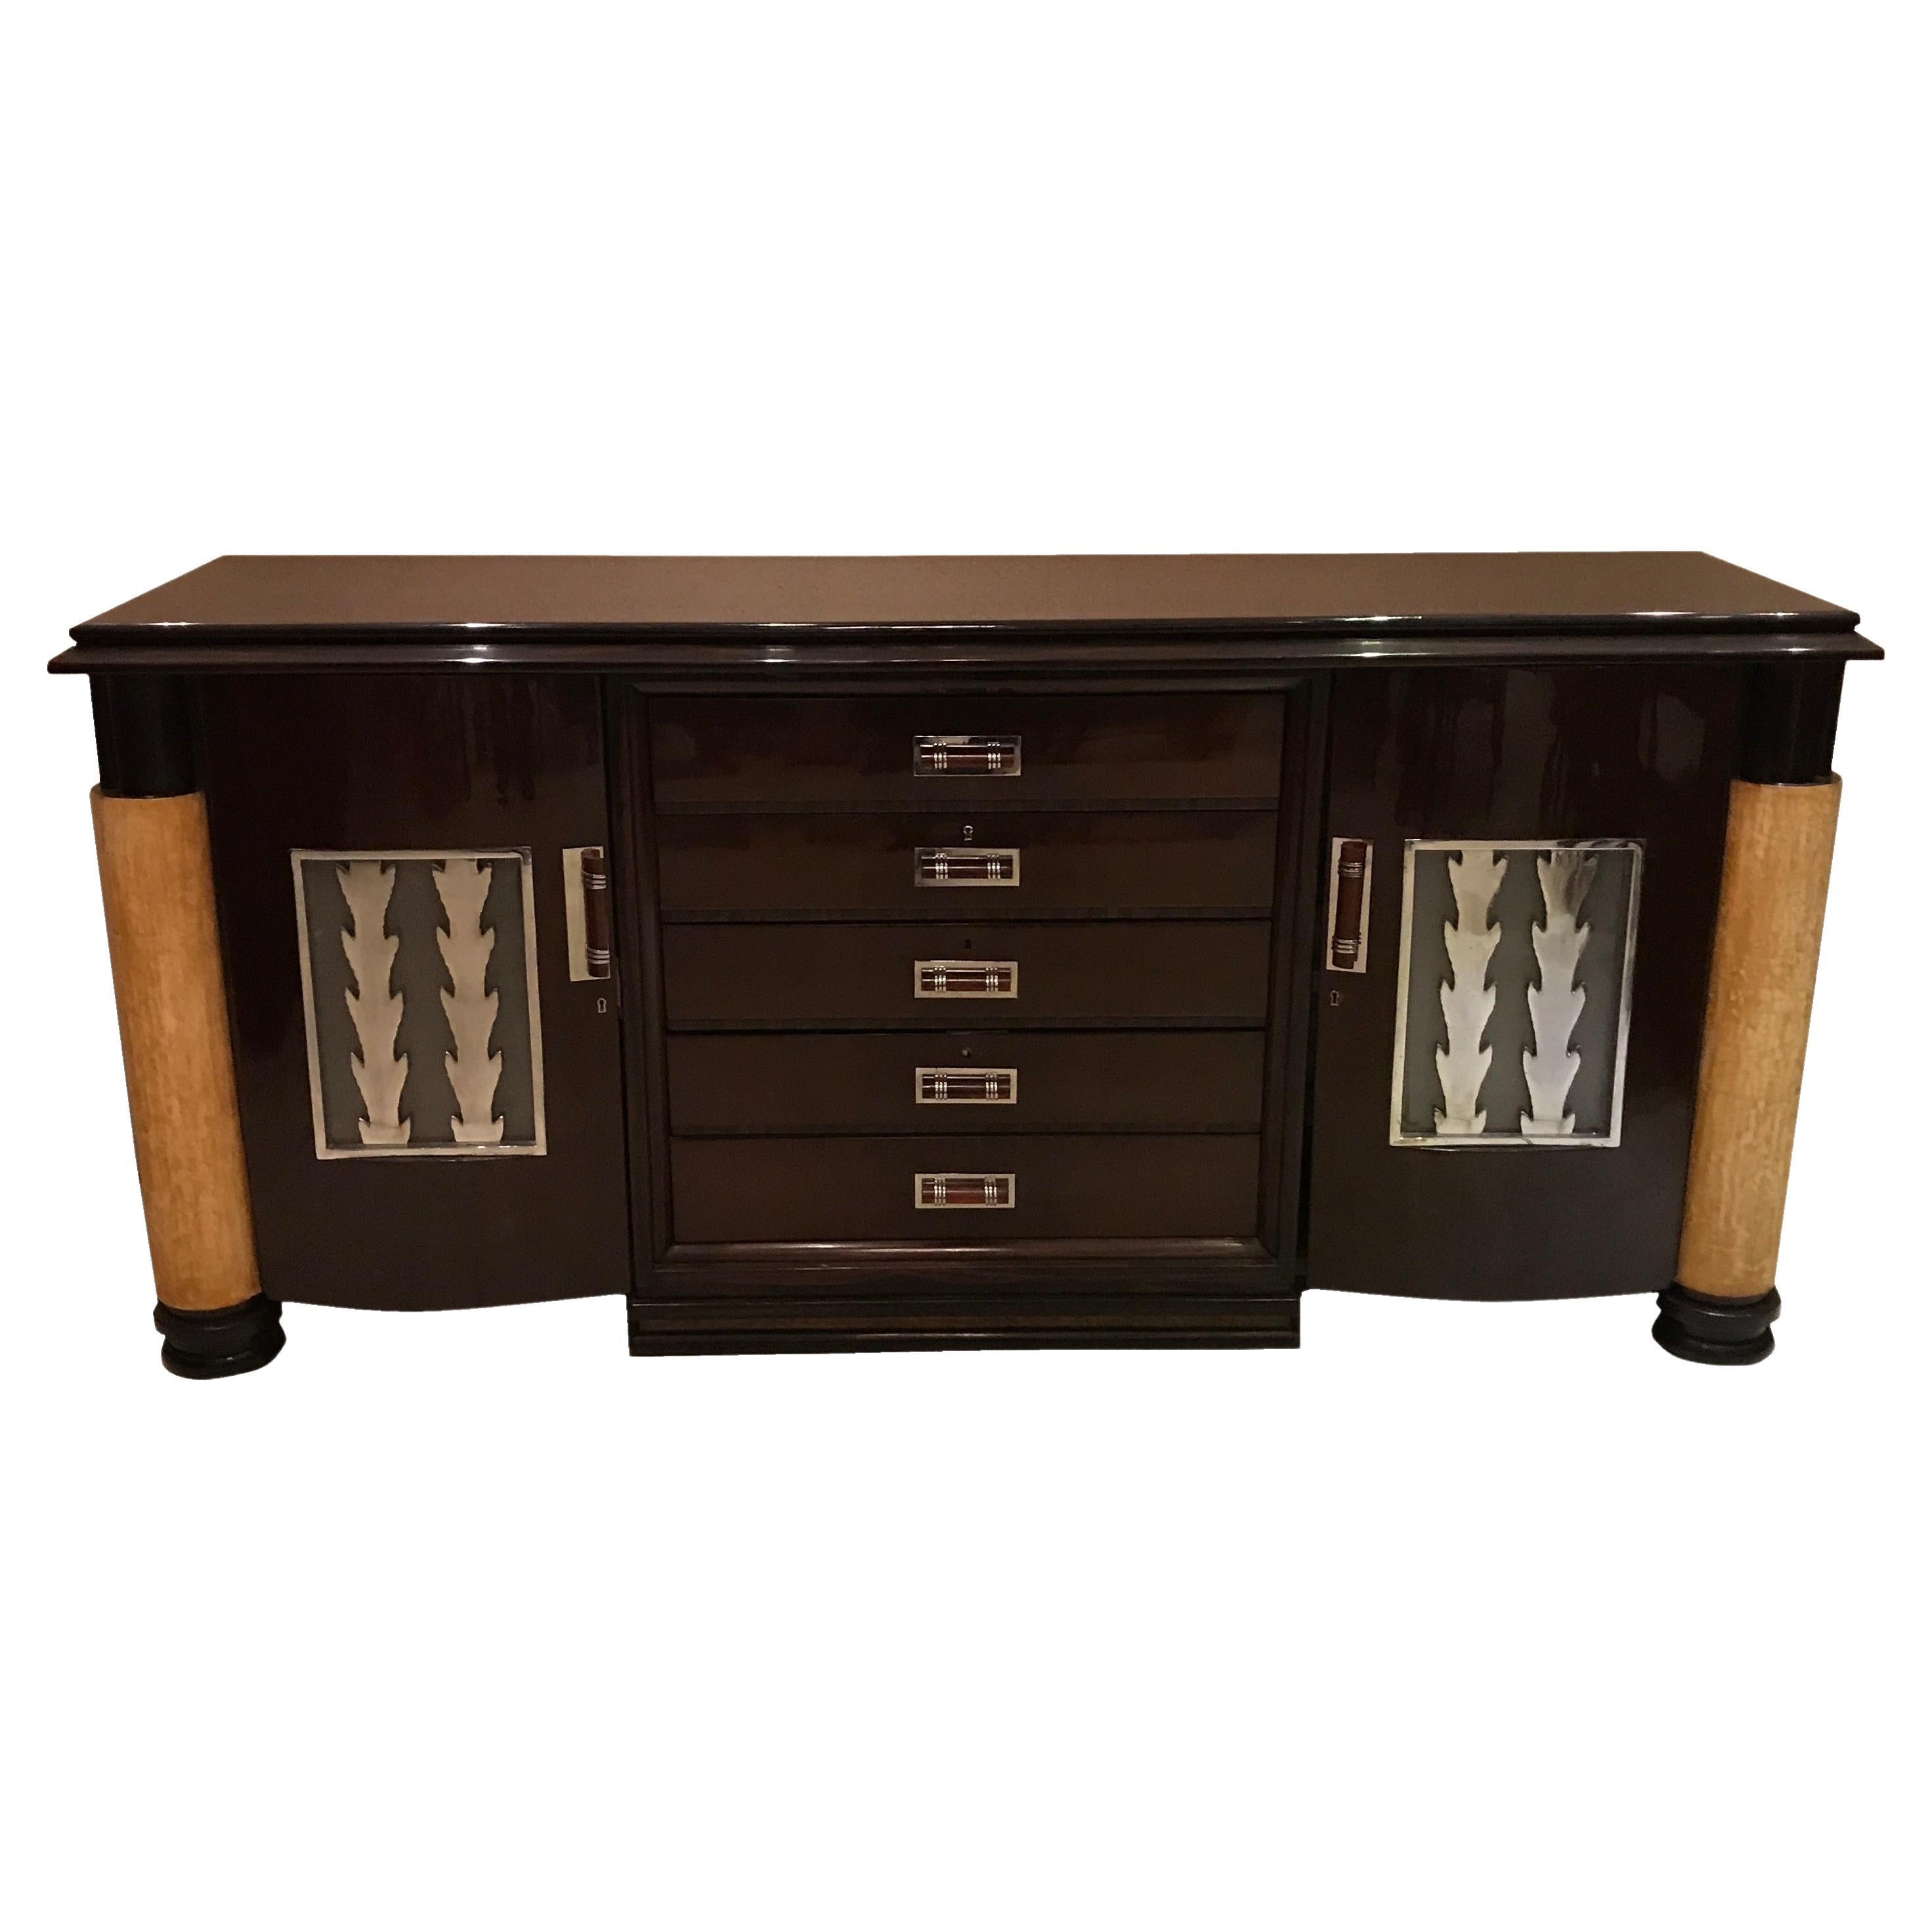 Art Deco Sideboard with Drawers in Wood, Parchment leather and Bronze Chromed For Sale